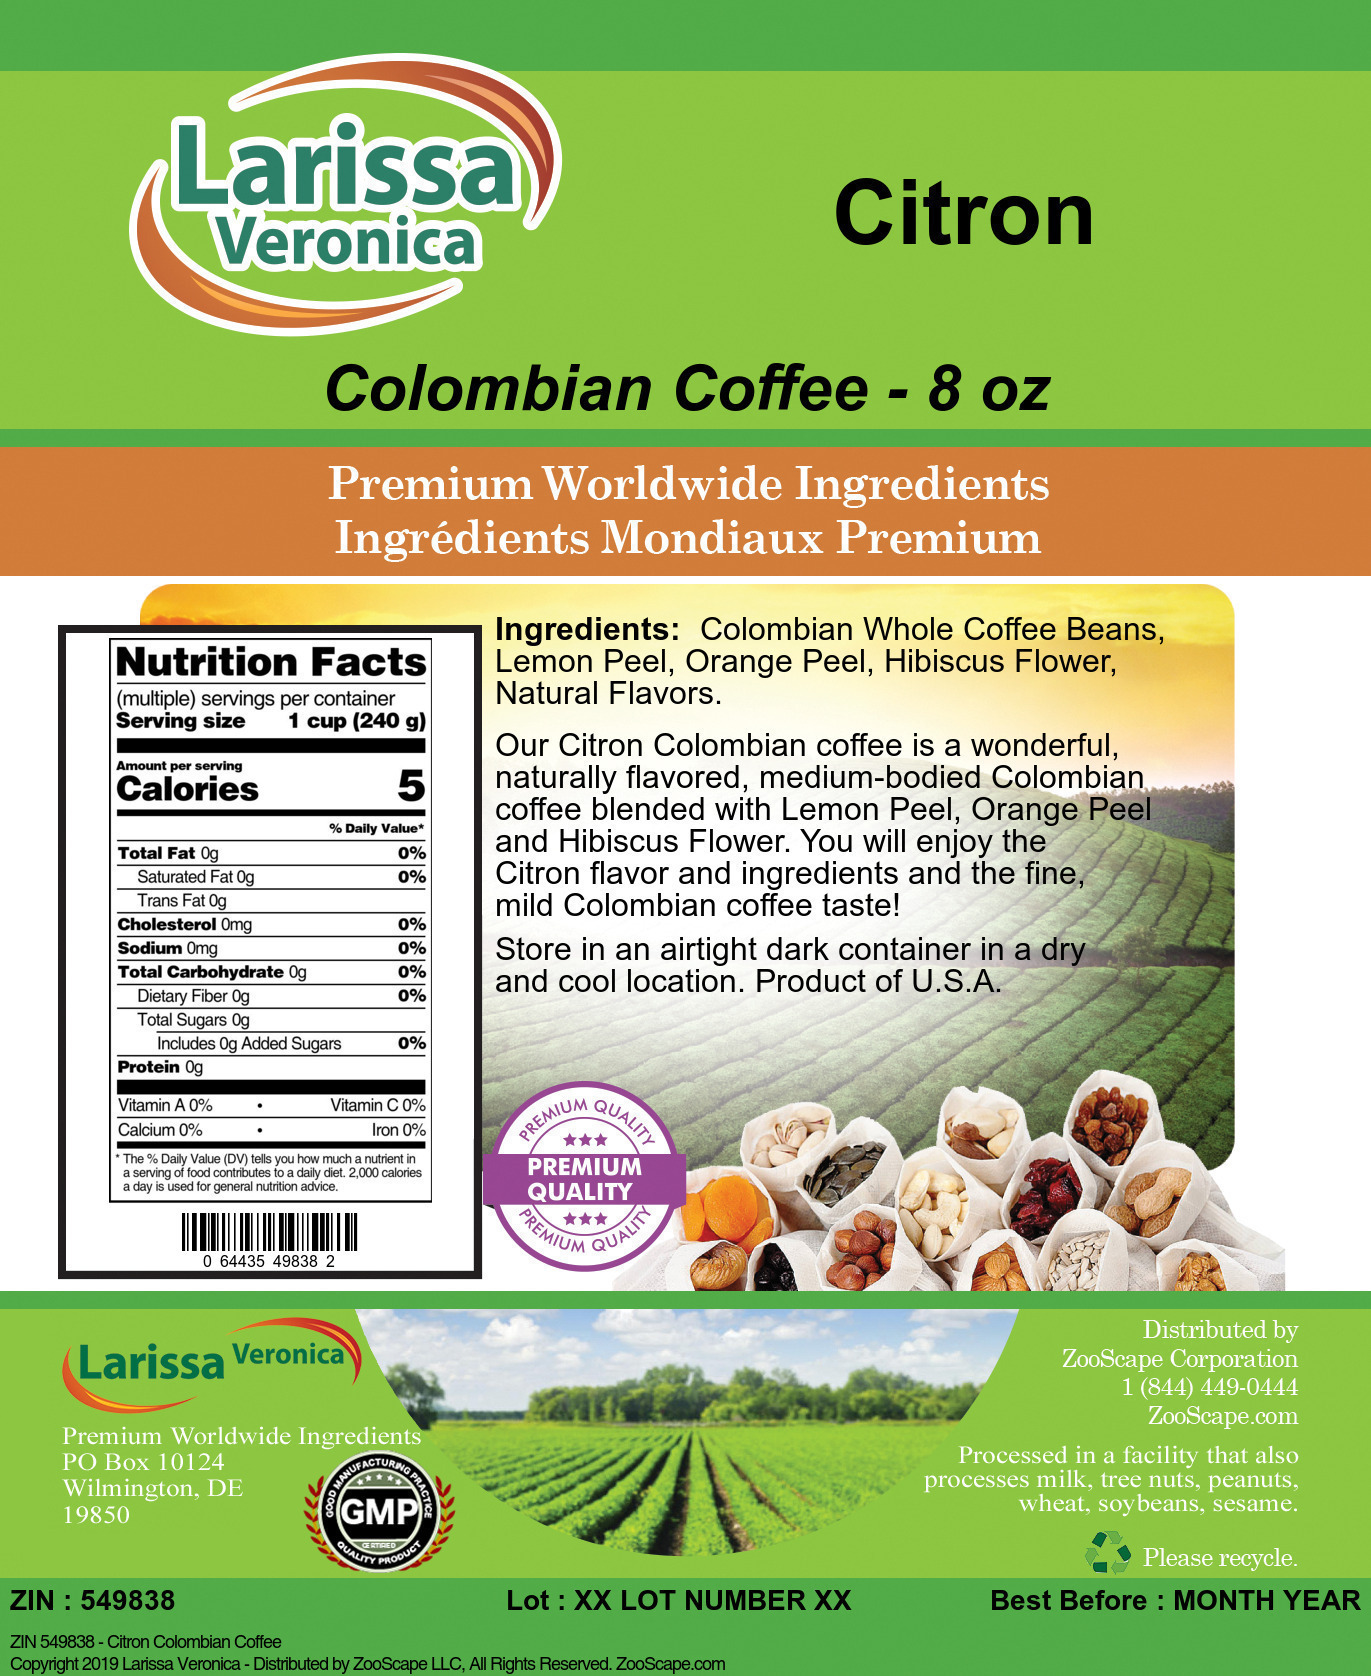 Citron Colombian Coffee - Label